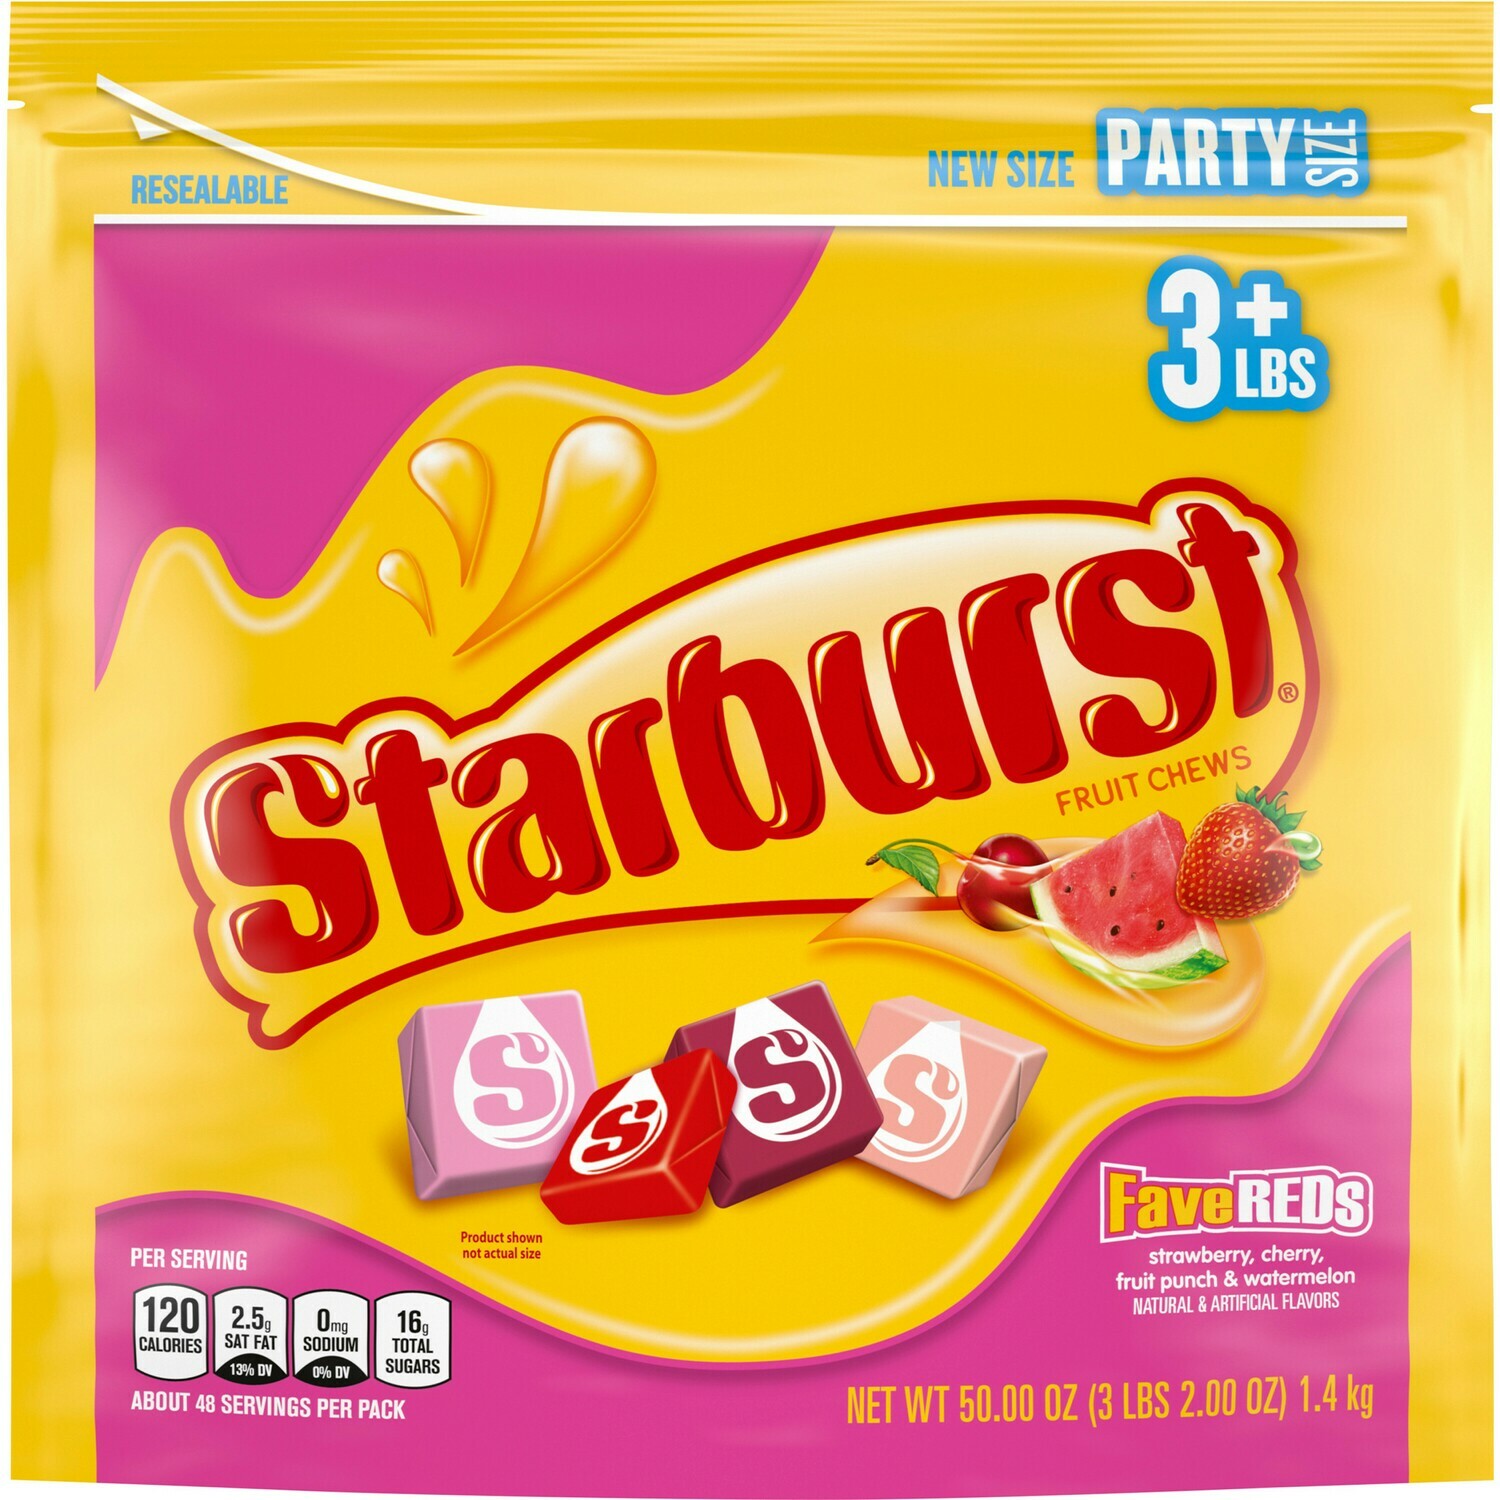 Party Bags     Starburst FaveREDs